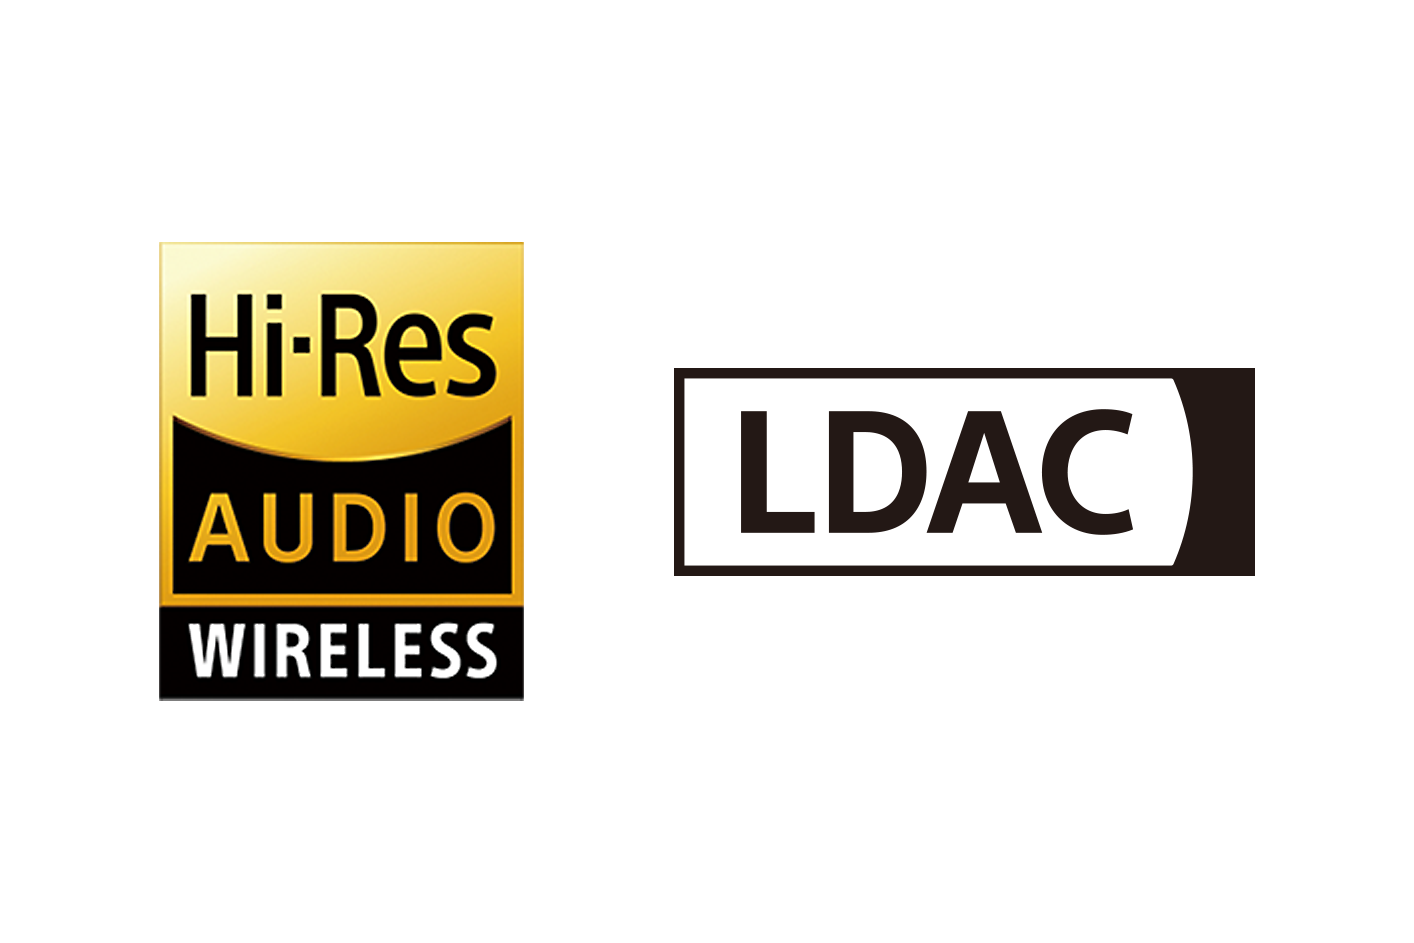 An image of the High-Res Audio Wireless and LDAC logo's.